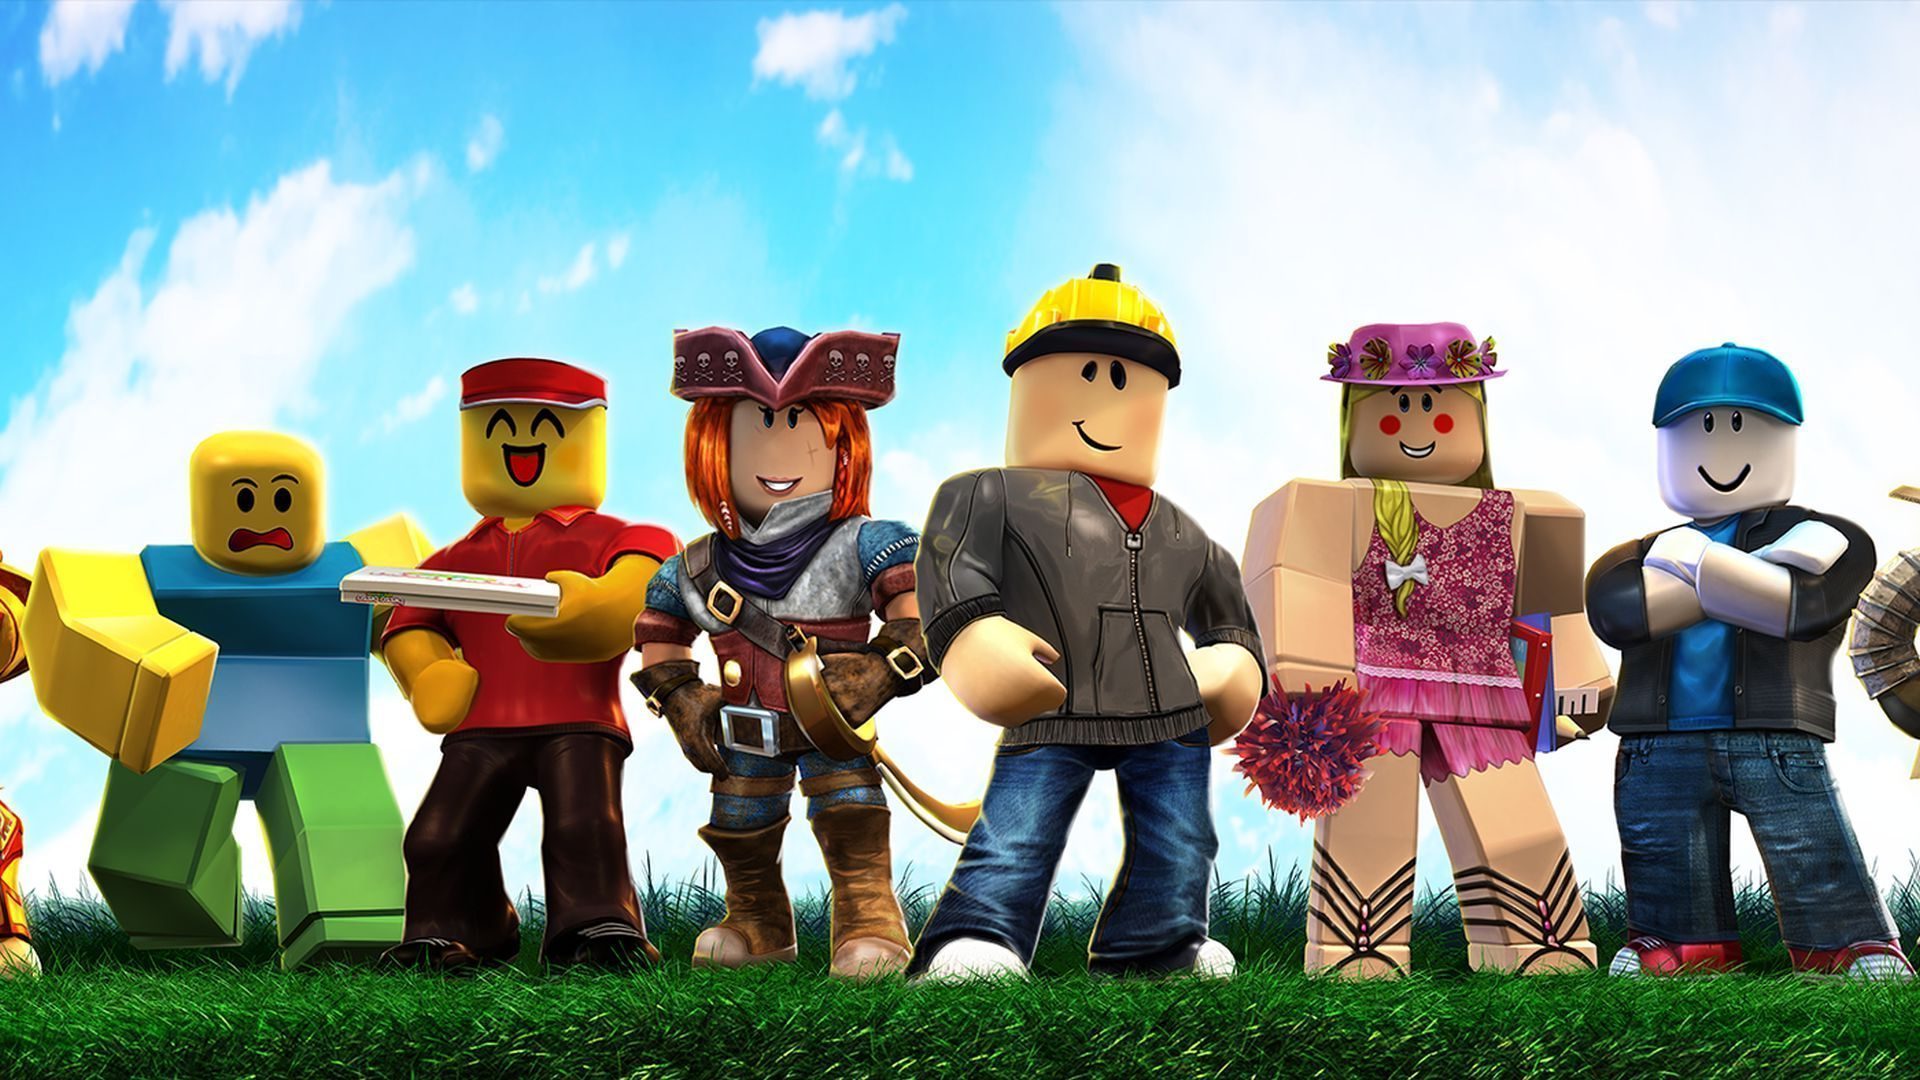 Roblox To Add 17+ Content To Their Platform